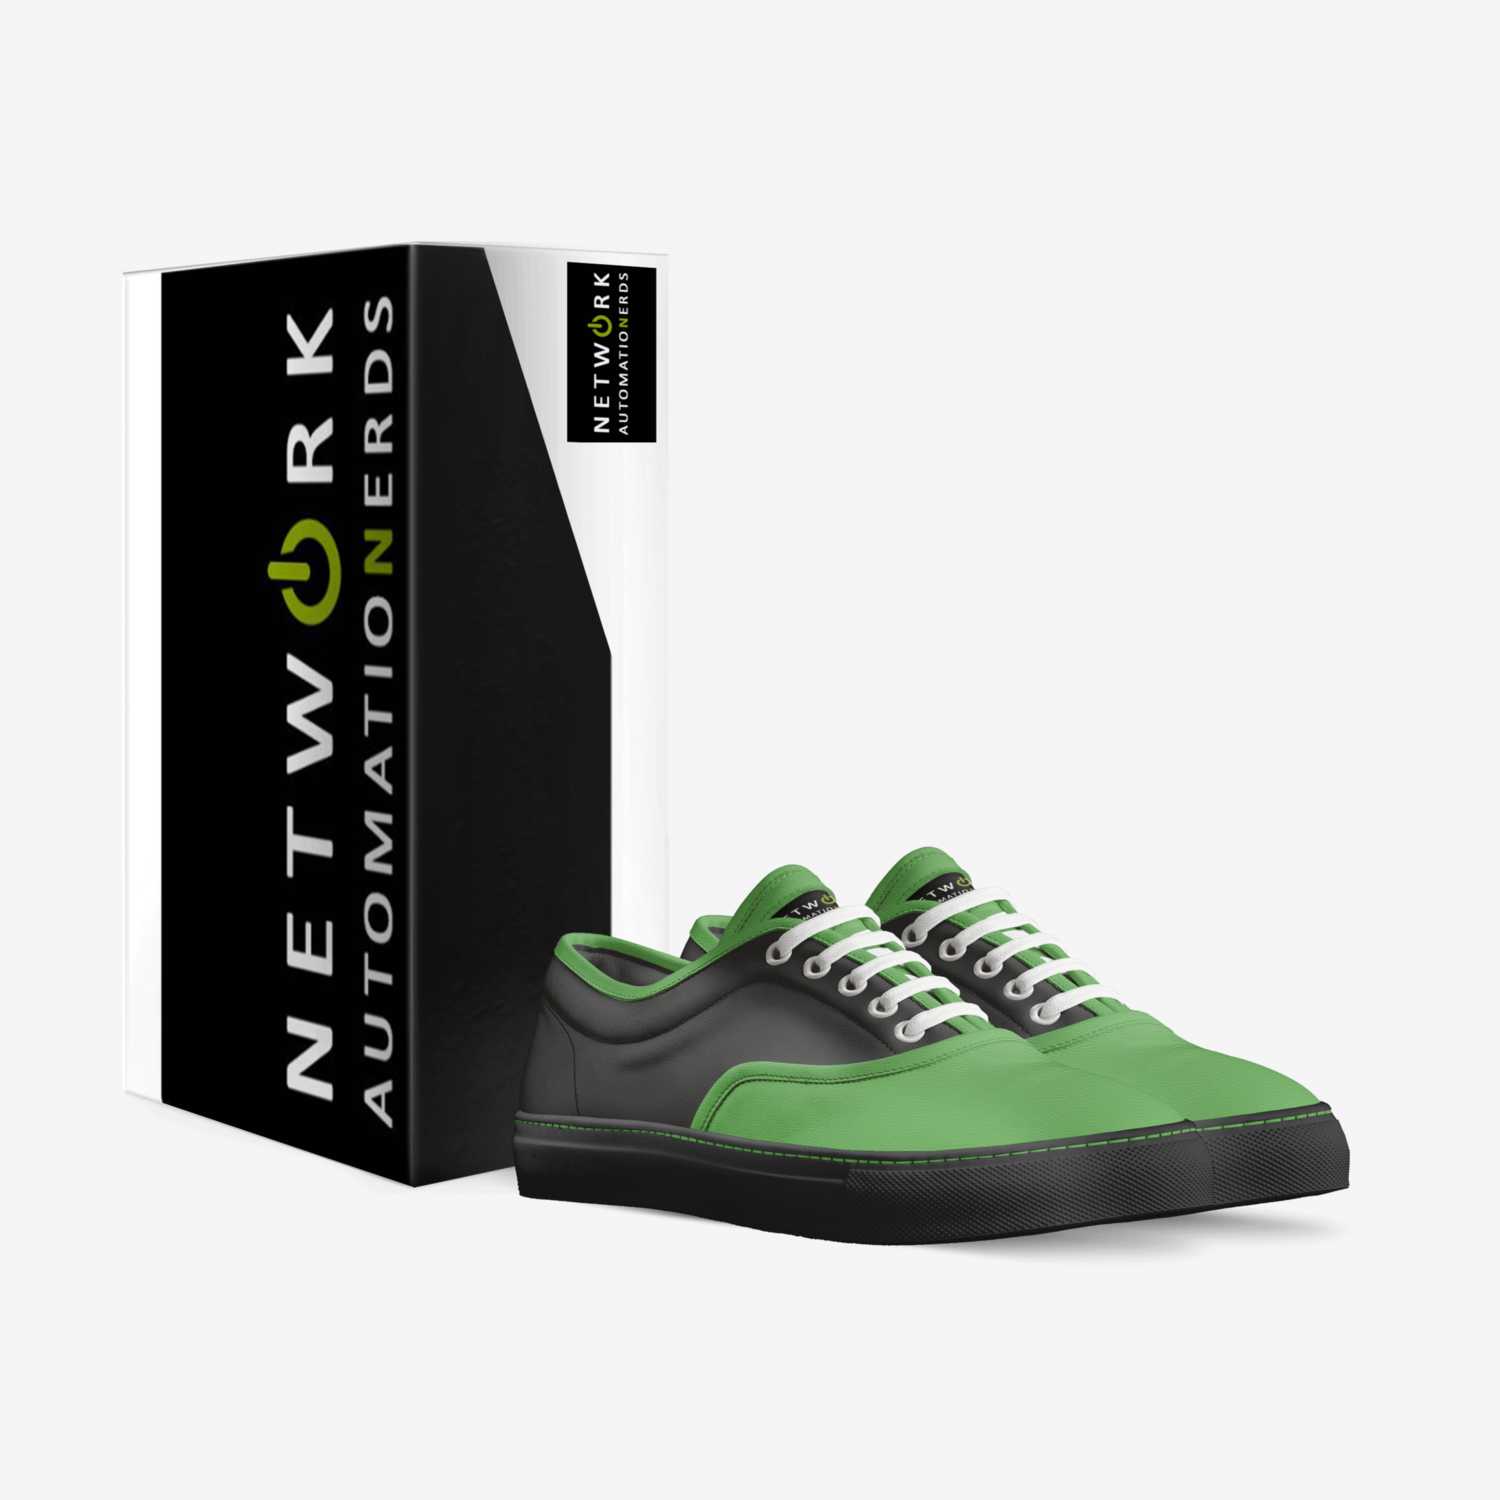 Network Automation custom made in Italy shoes by Eric Chou | Box view